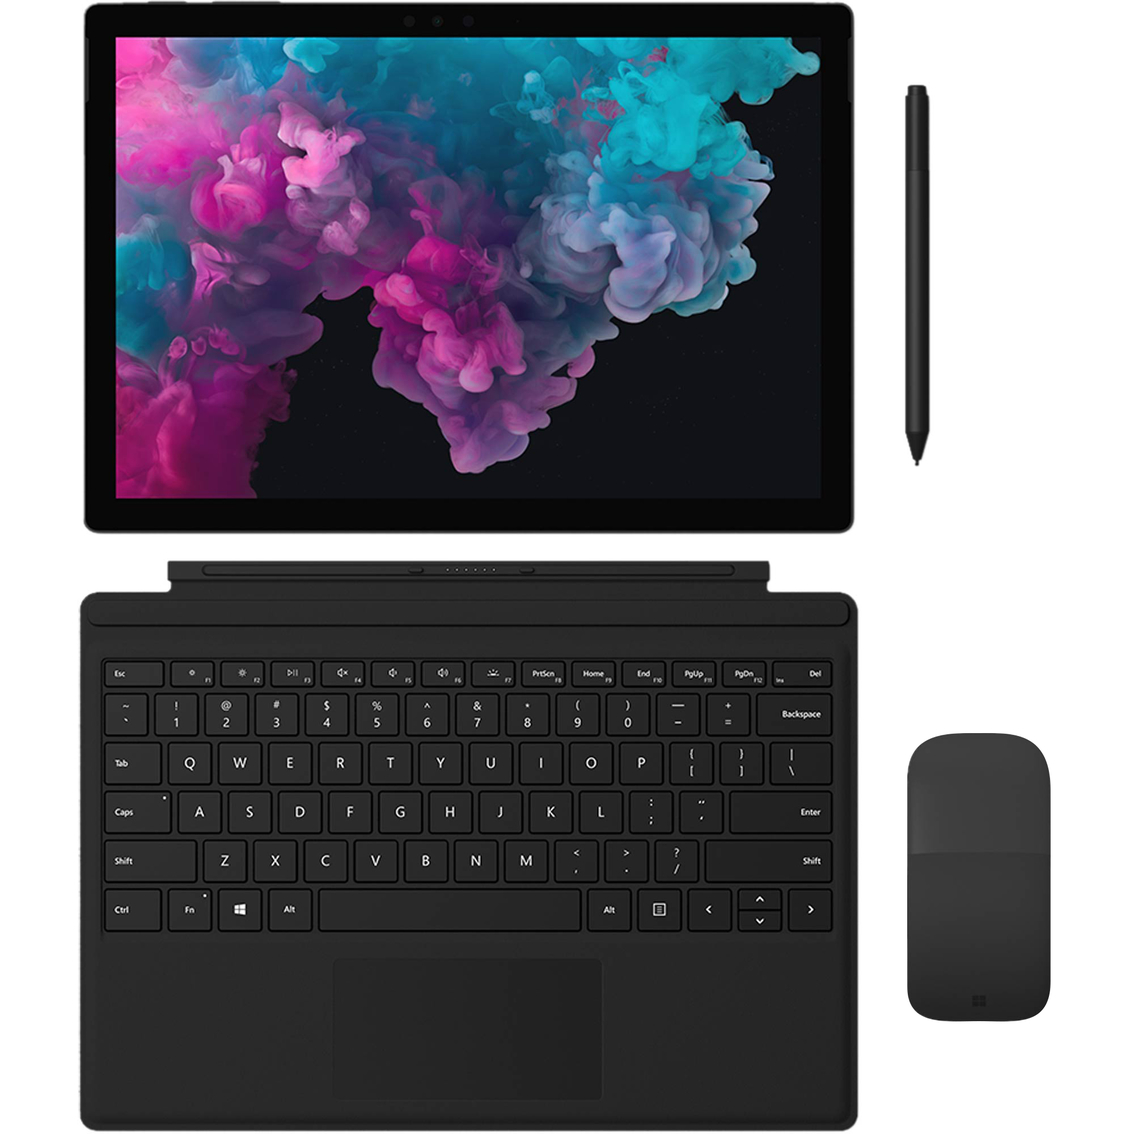 Microsoft Surface Pro 6 12.3 in. Touchscreen Intel i7 16GB RAM 512GB SSD Tablet - Image 2 of 7